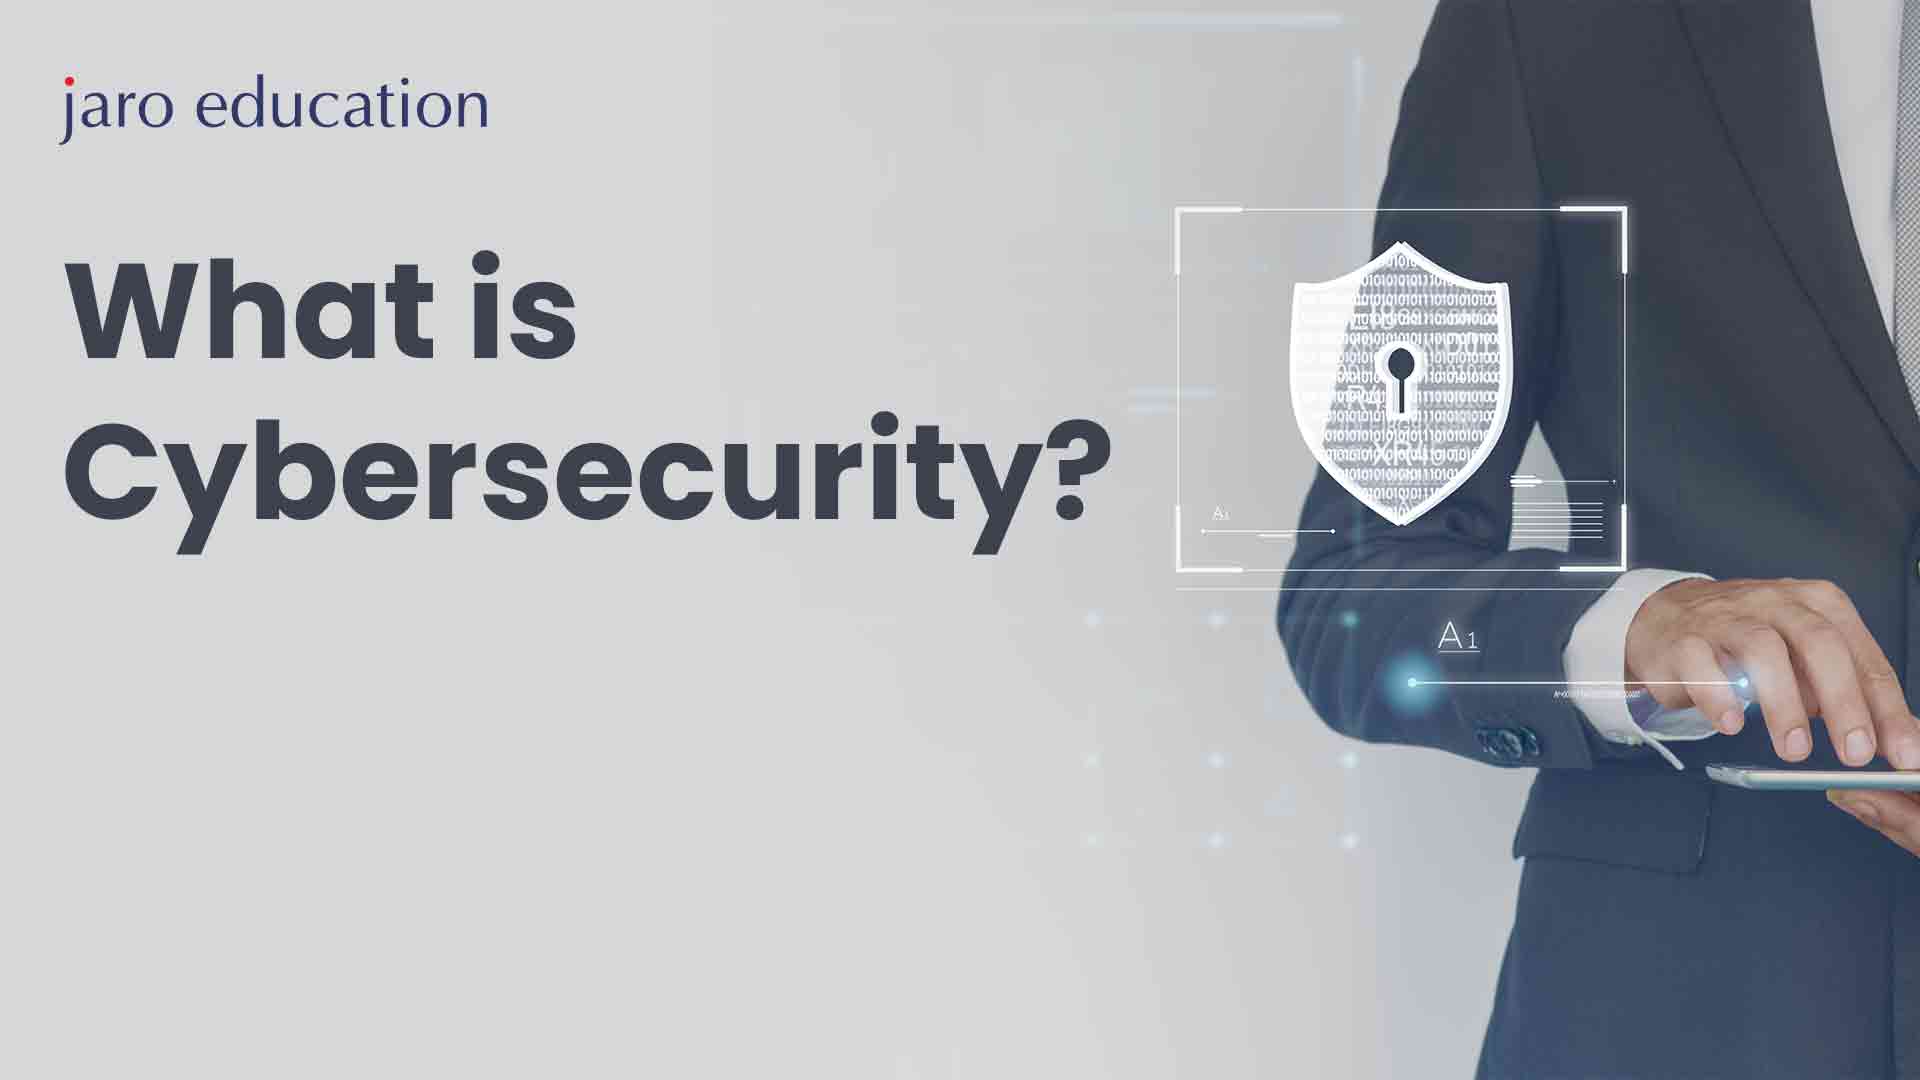 What is Cybersecurity